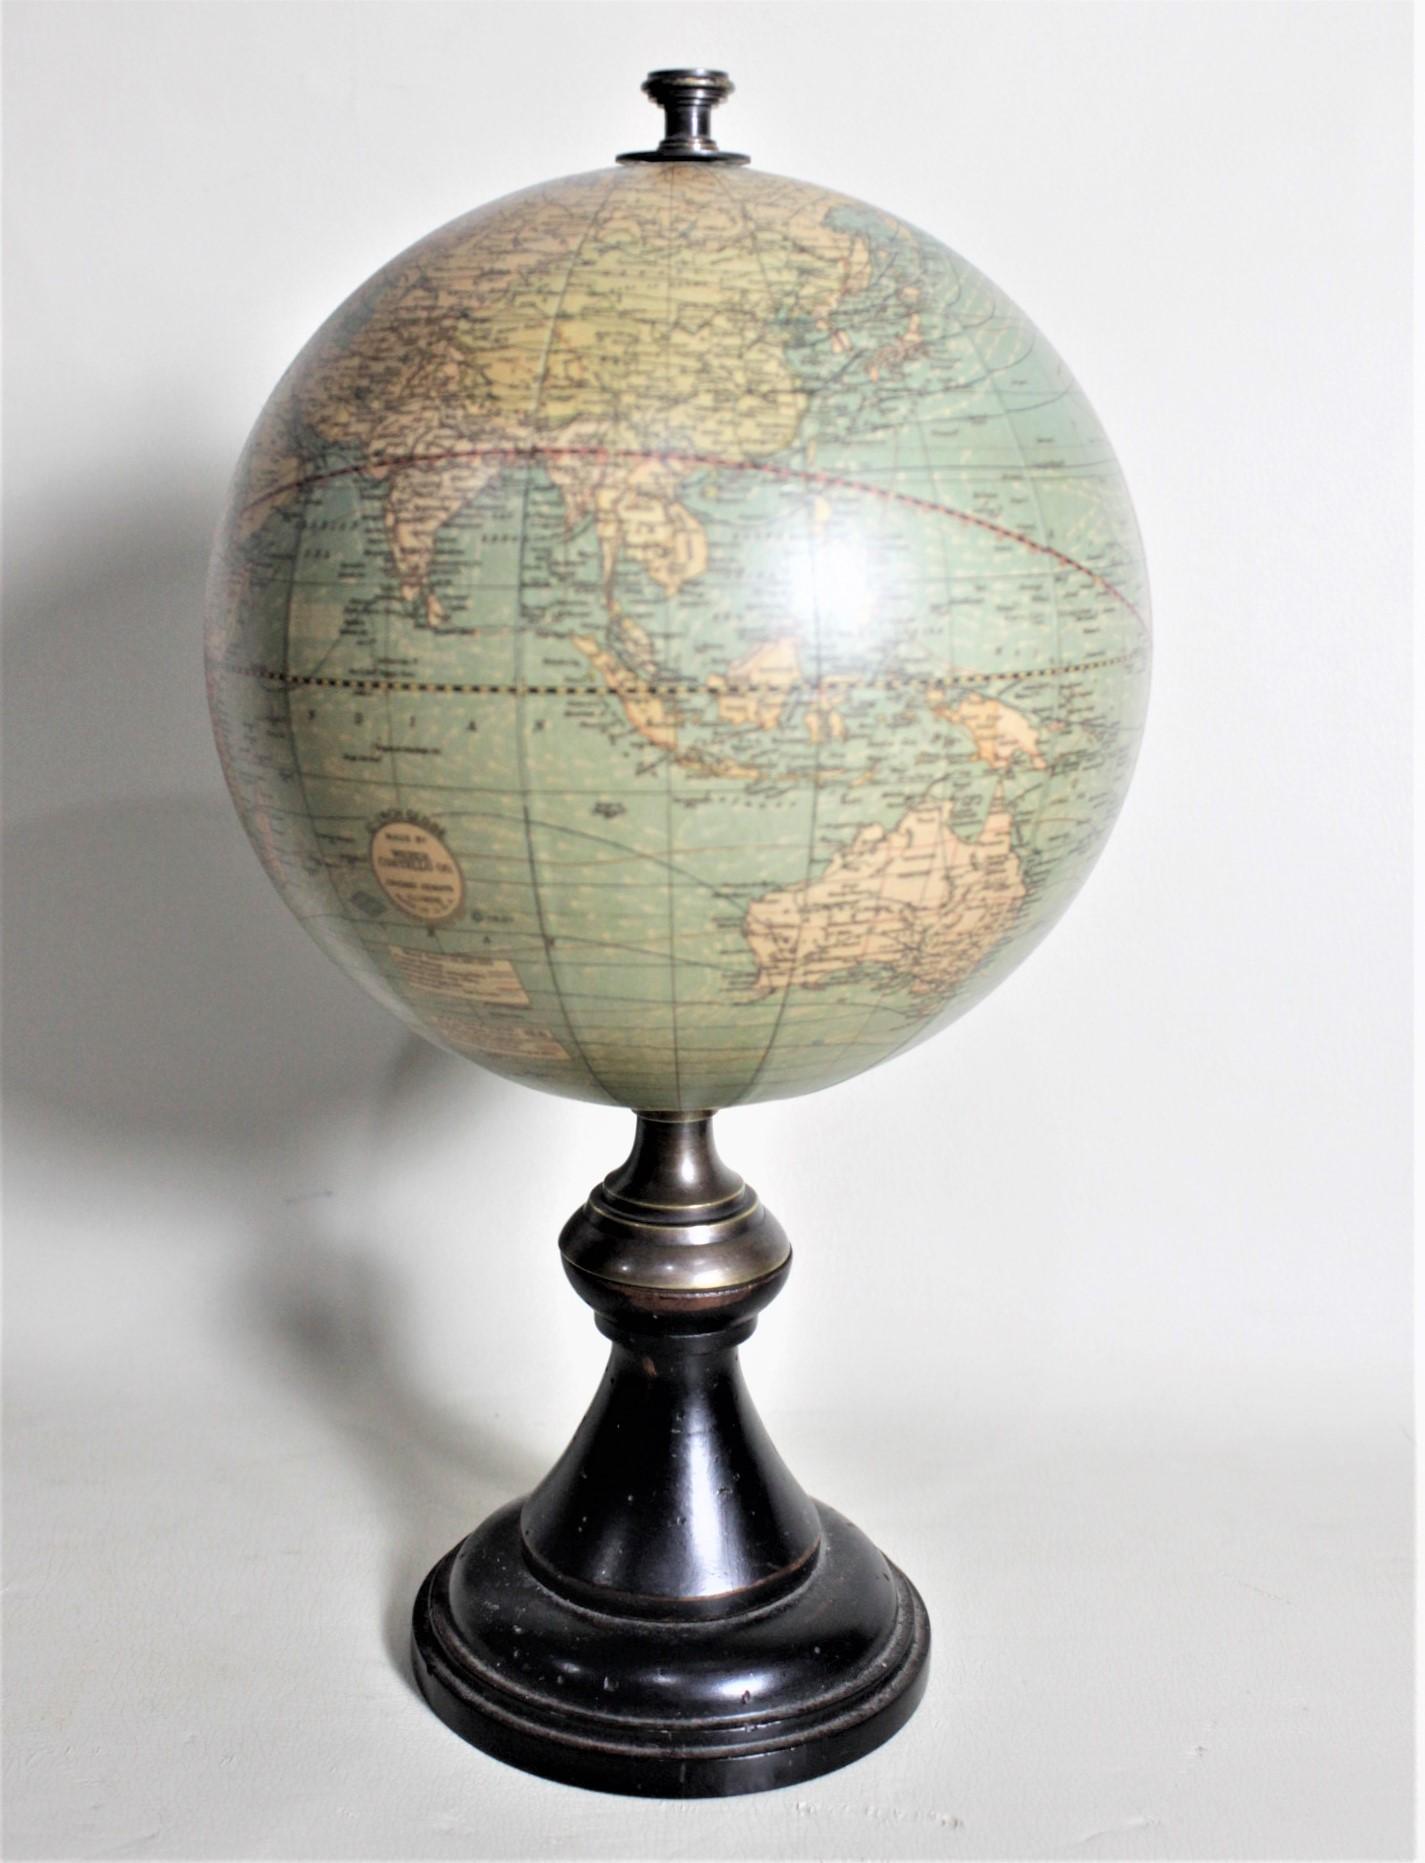 American Art Deco Era Weber-Costello 12 Inch Desk World Globe with Turned Wooden Base For Sale